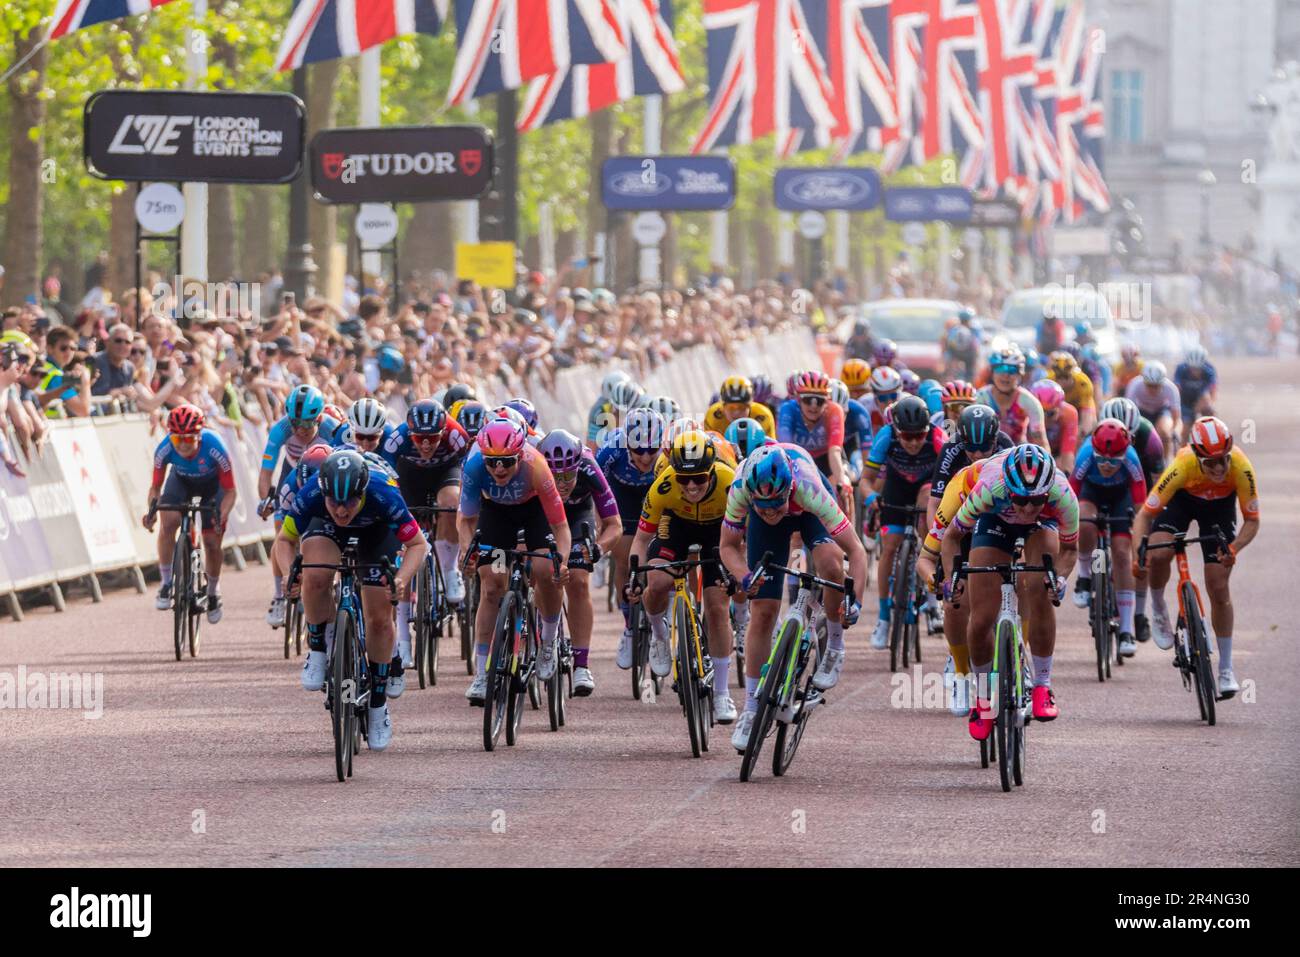 Bunch sprint finish of the Classique UCI Women's WorldTour road race Stage 3 of the 2023 Ford RideLondon. Won by Charlotte Kool of Team DSM Stock Photo